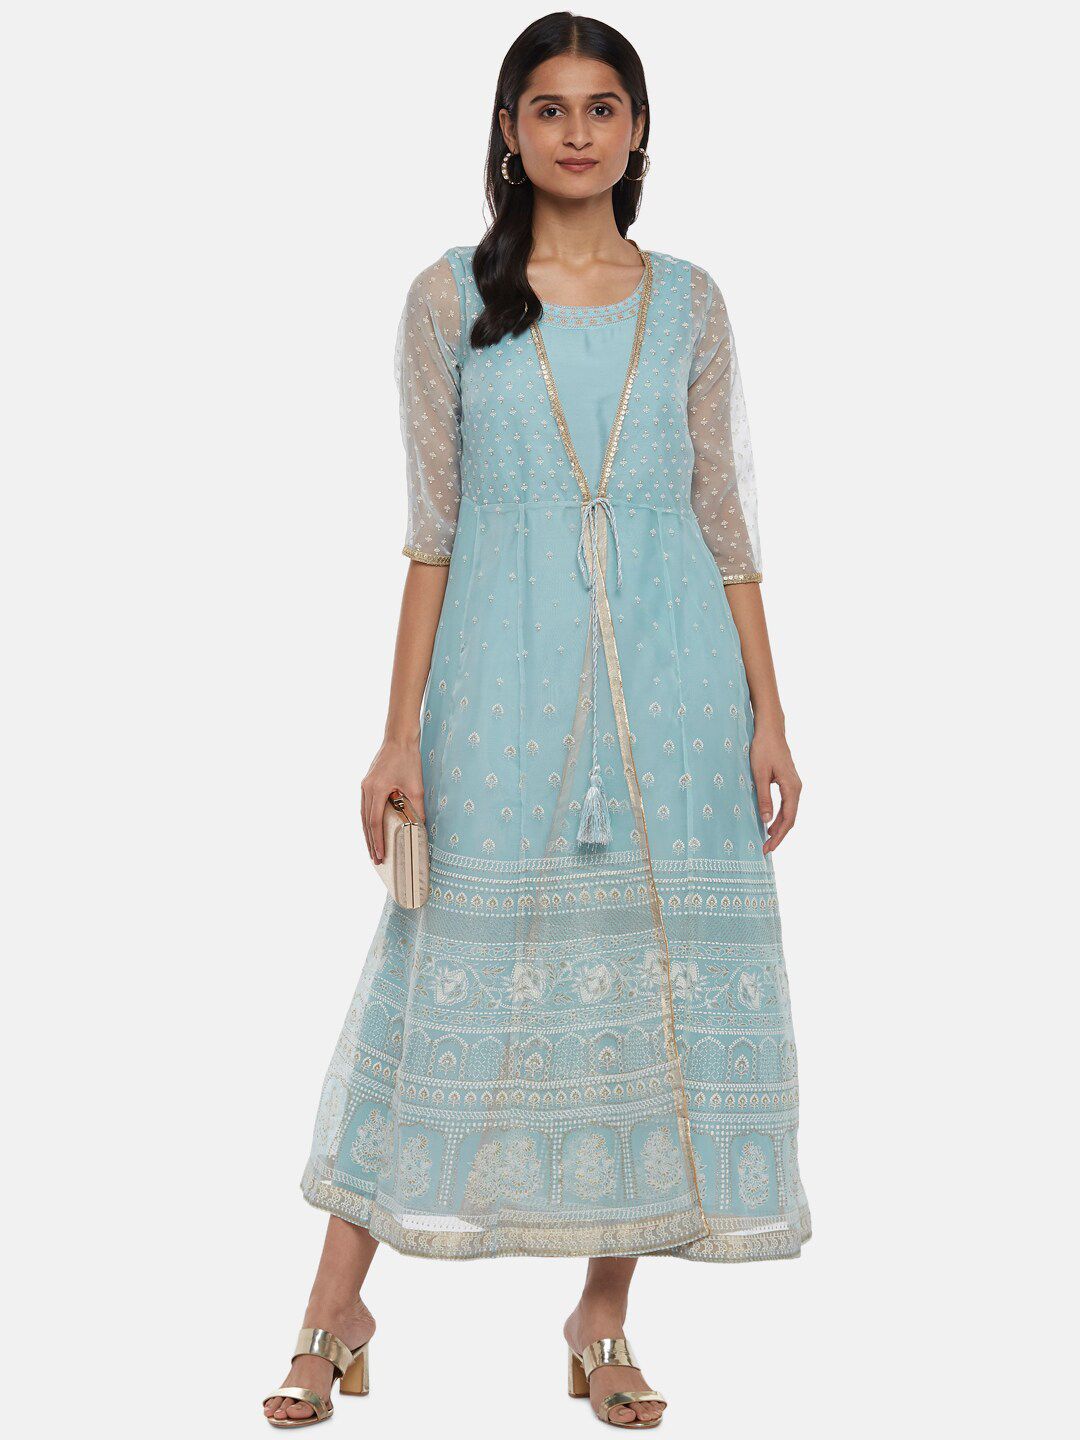 RANGMANCH BY PANTALOONS Blue Net Ethnic A-Line Maxi Dress Price in India